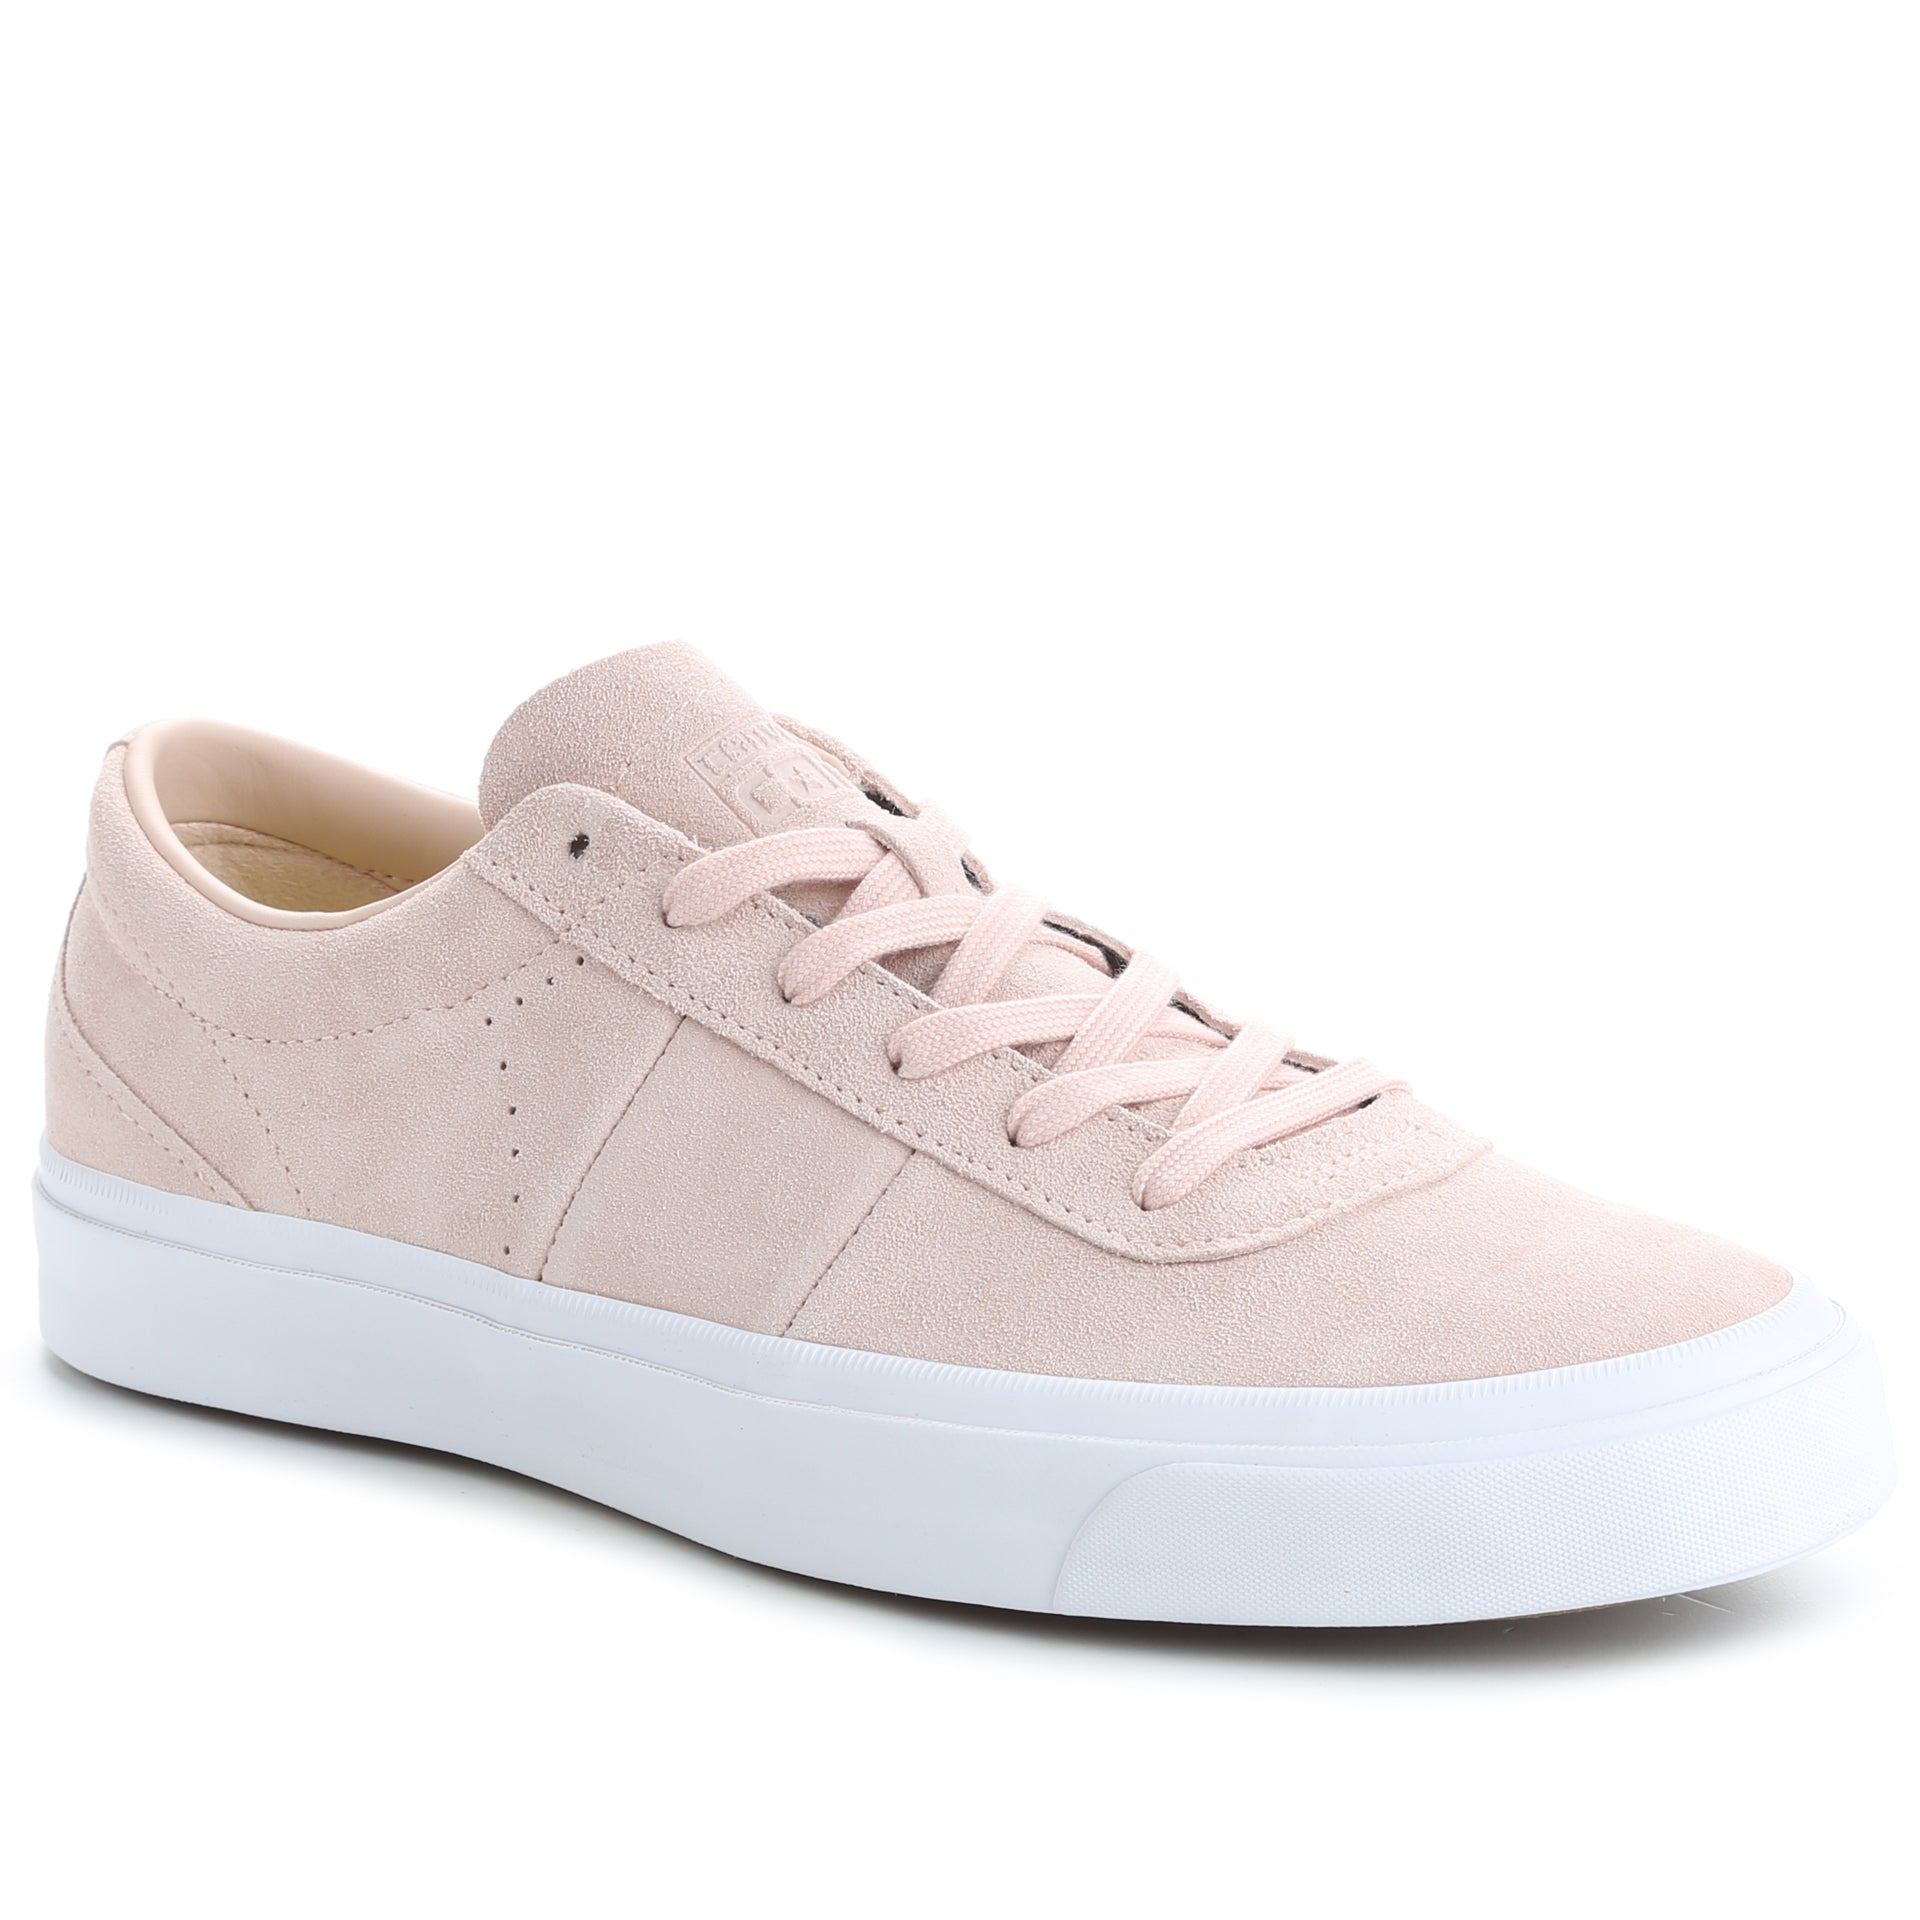 Converse One Star CC Oiled Suede Low Top Dusk Pink New Star